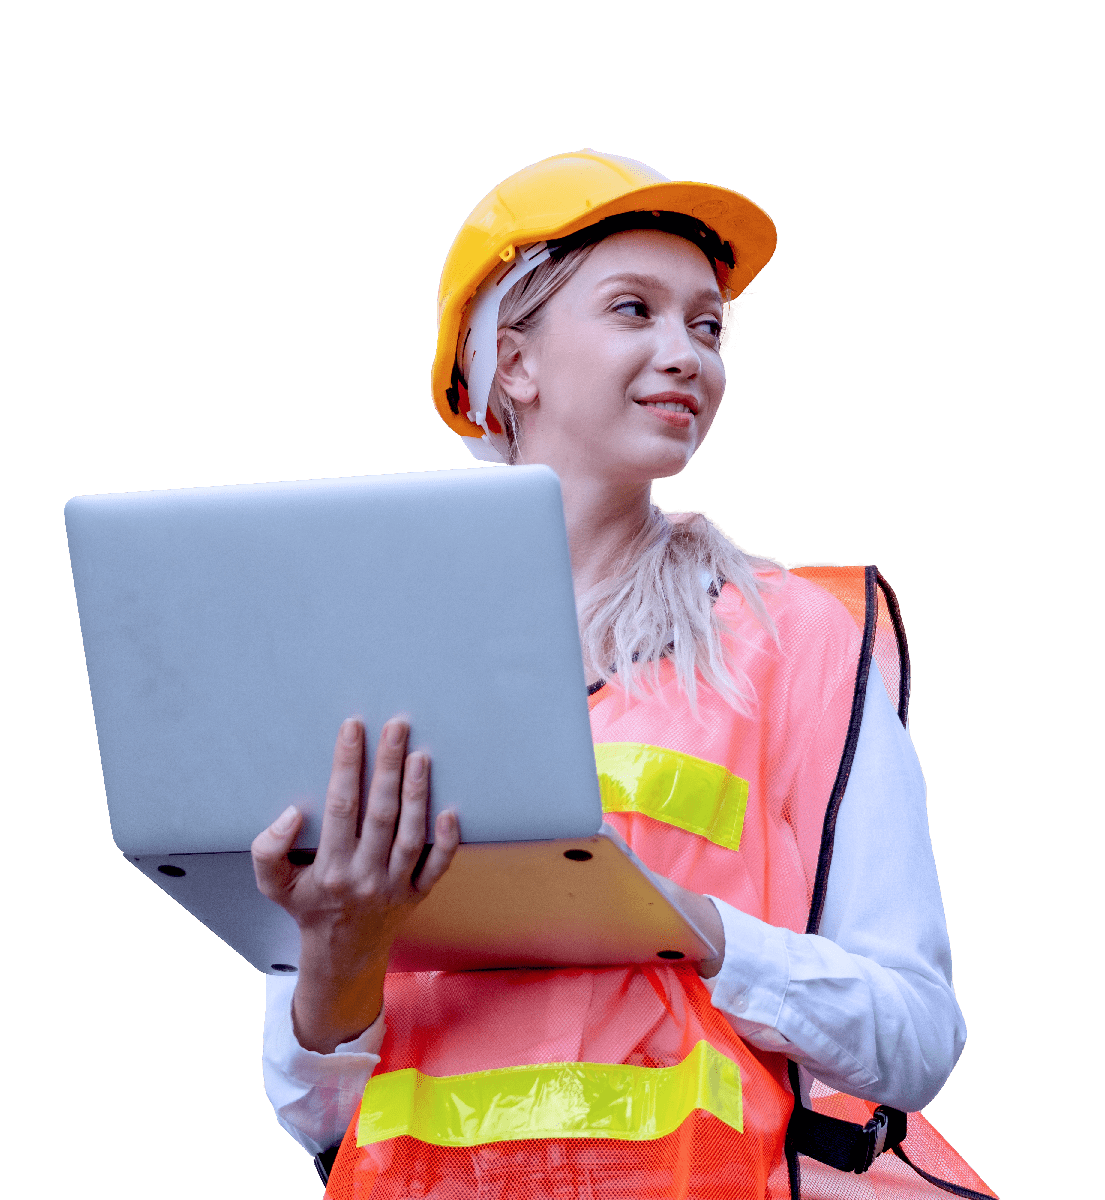 A woman in a hardhat and safety vest holding an open laptop.